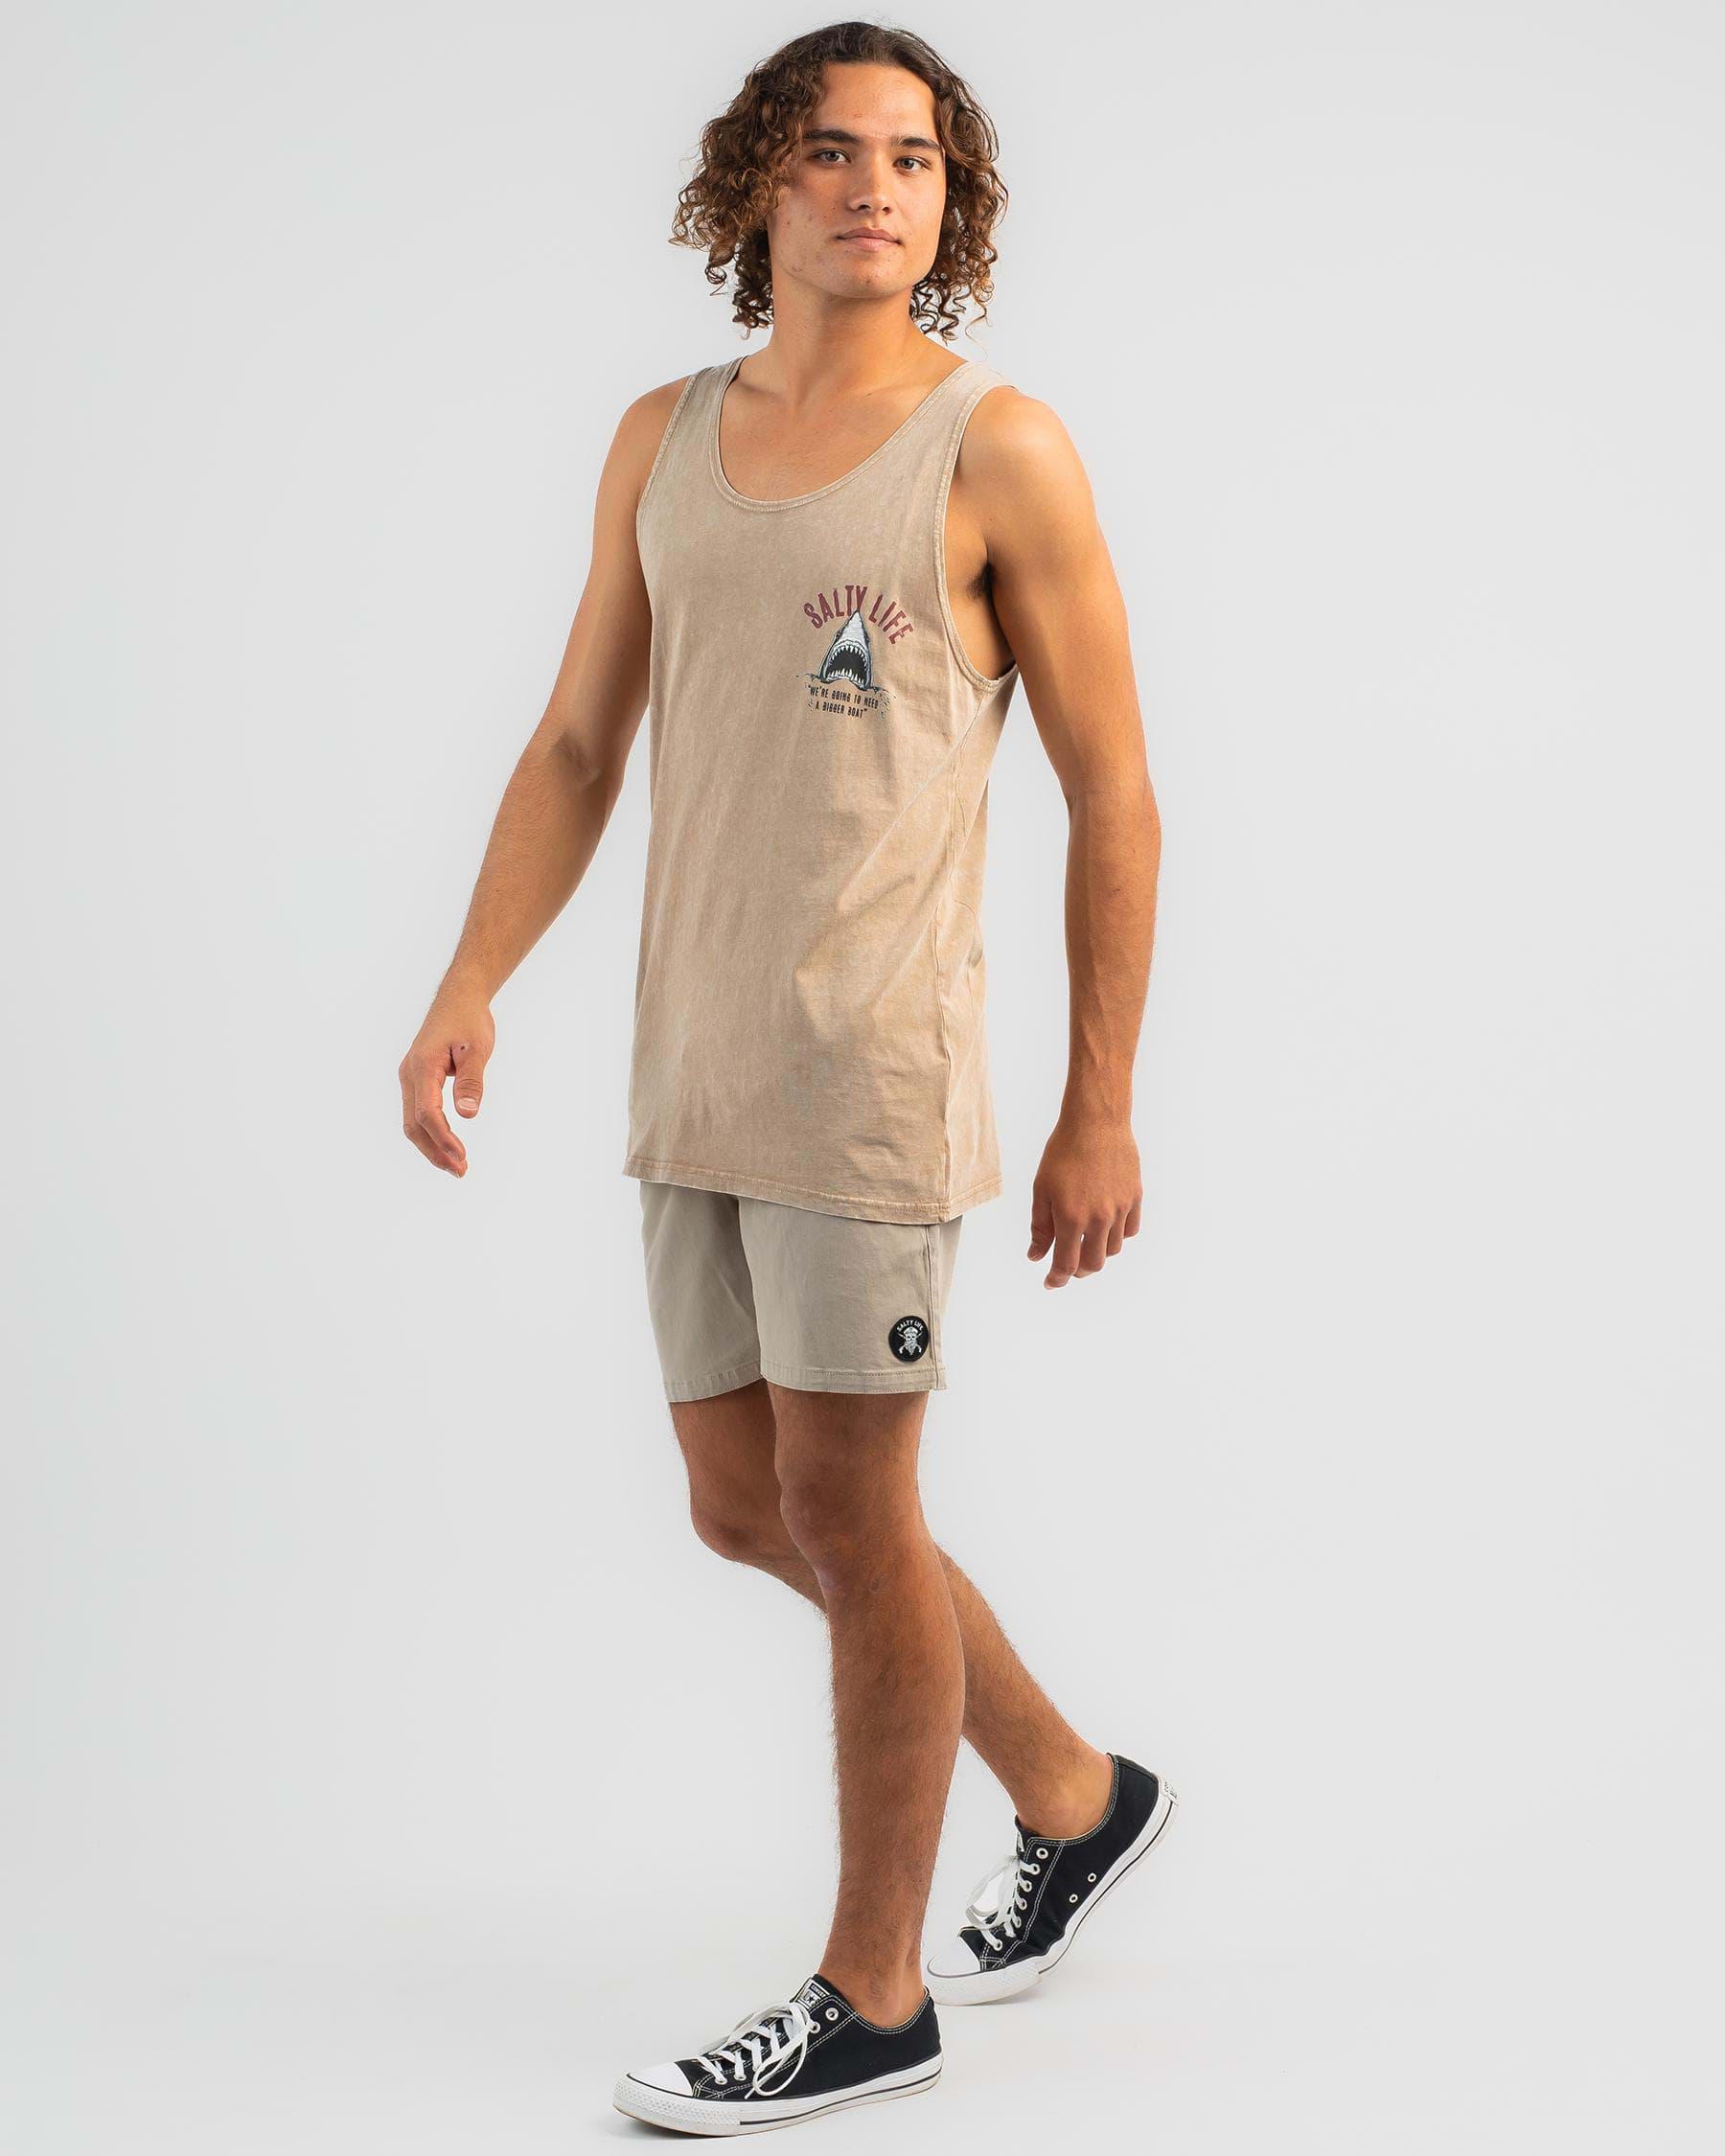 Salty Life Frenzy Singlet In Sand Acid - Fast Shipping & Easy Returns ...